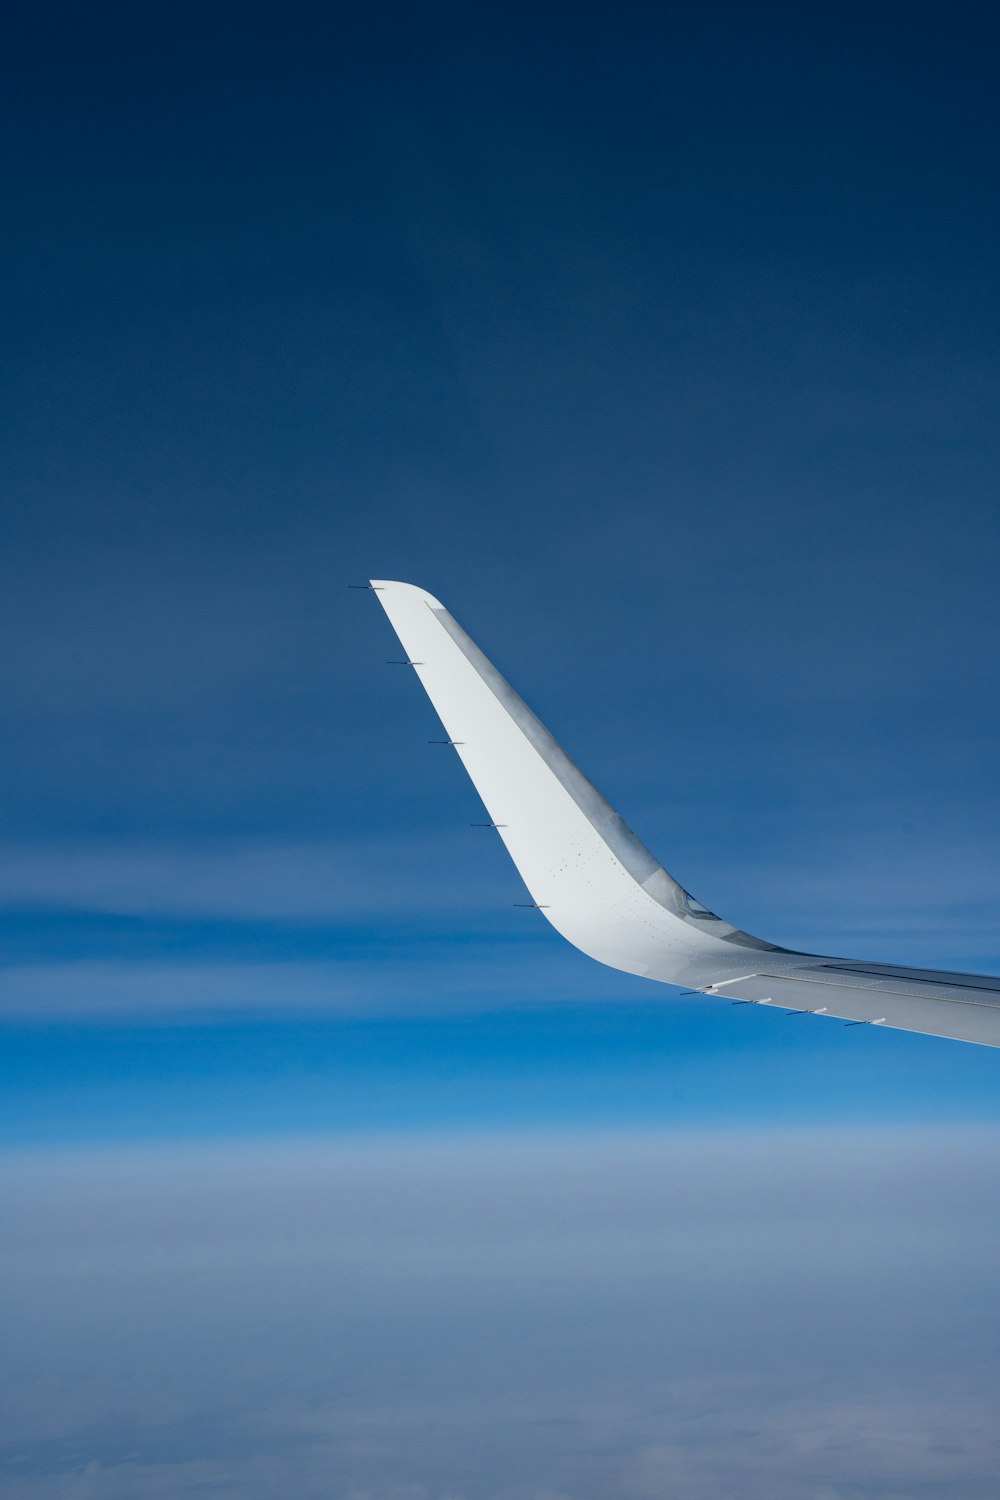 the wing of an airplane flying in the sky